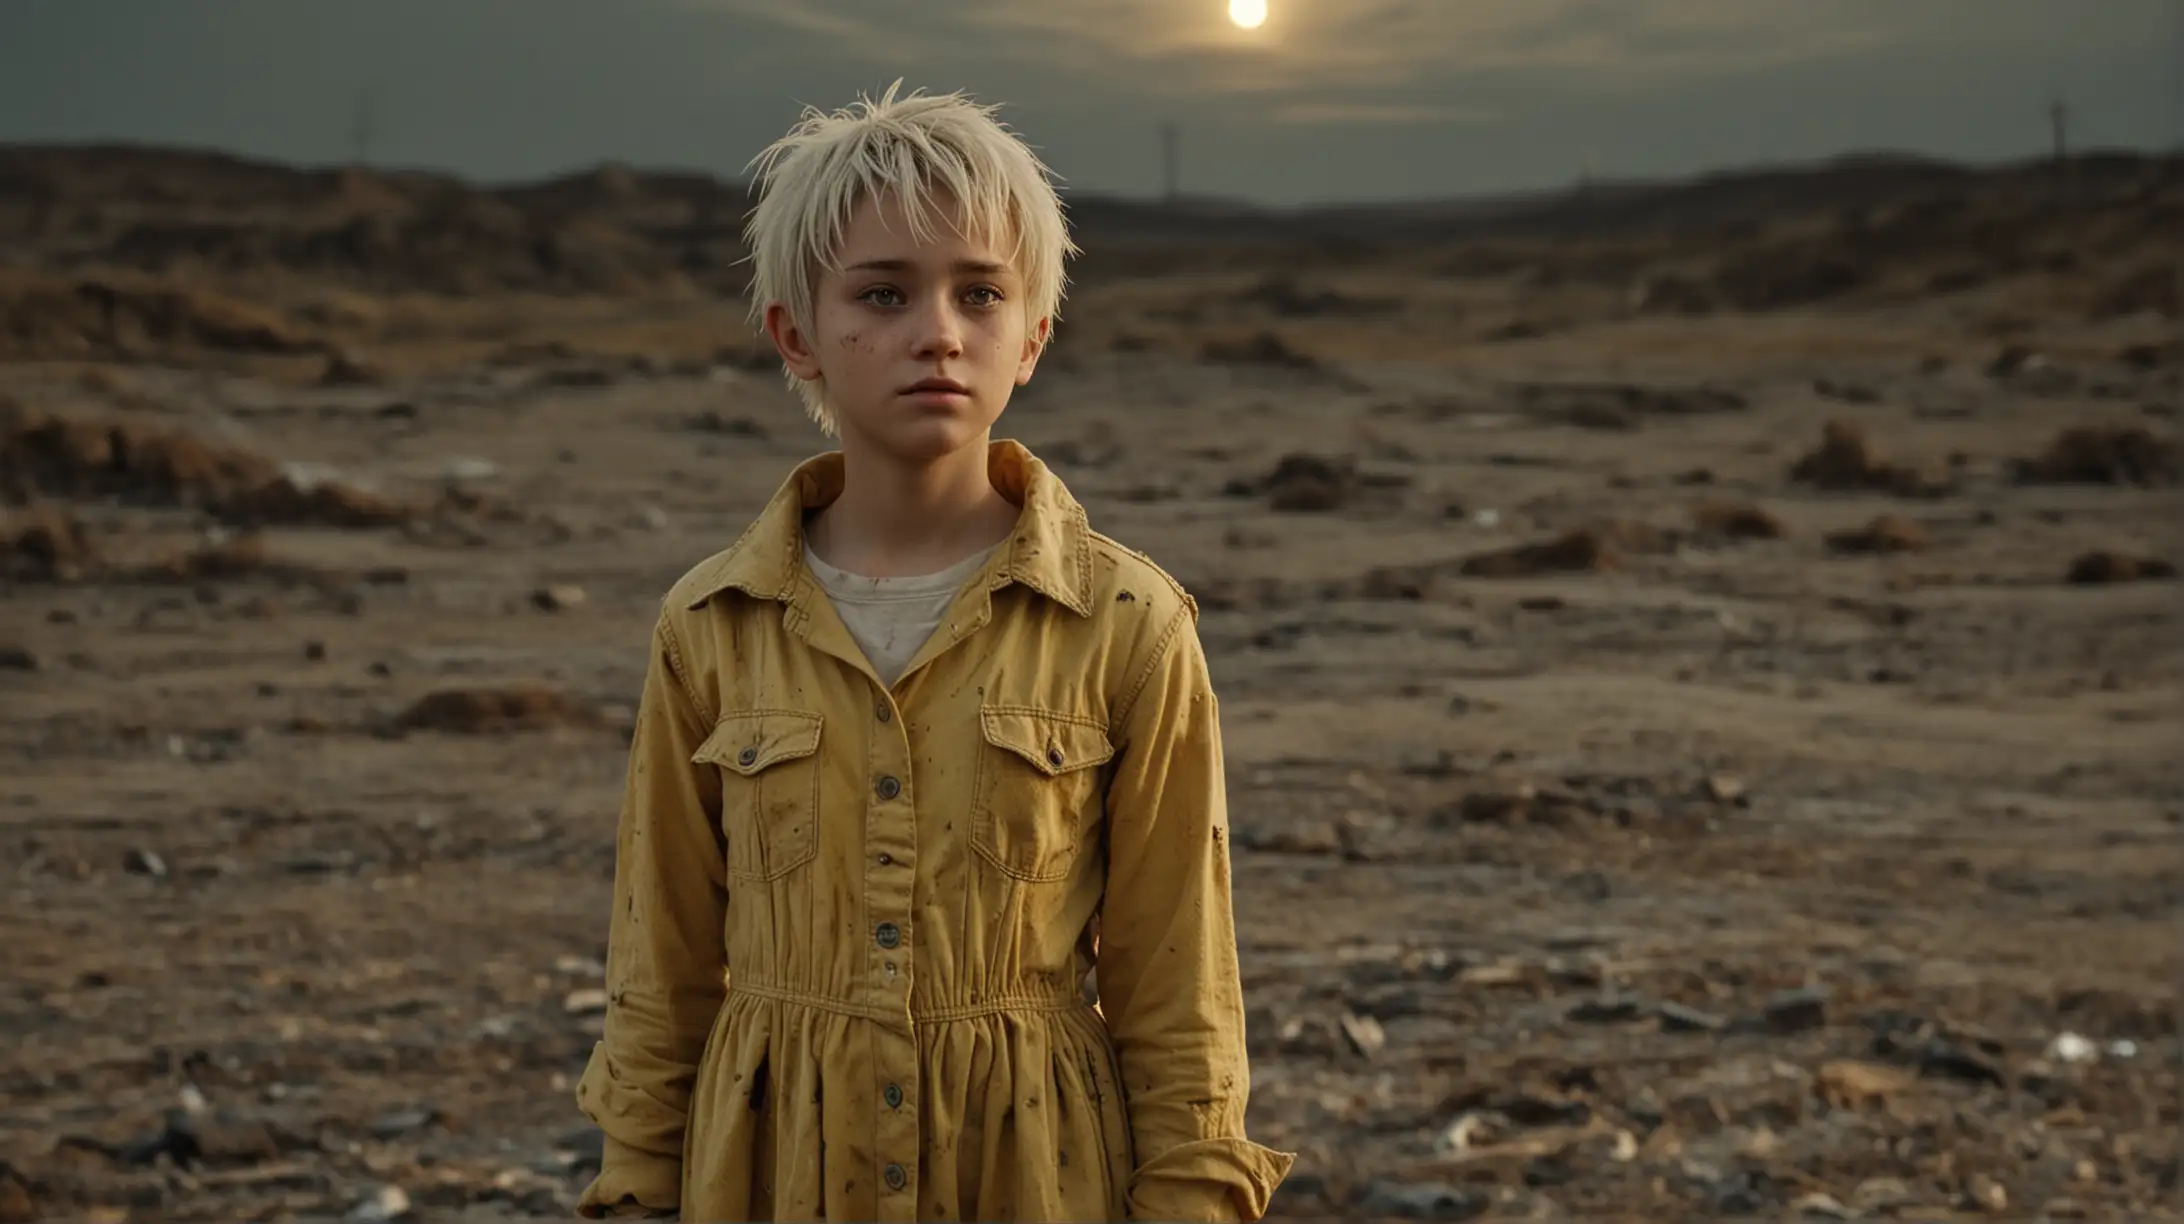 Wide shot 16 : 9 cinematic photorealistic. Extremely beautiful small 11 year old, very girlish, wearing dirty dull yellow apocalyptic raggedy clothes. She has a white pixie haircut, with a worried look on her dirt streaked face.  There is a golden butterscotch glow shining from behind her. It’s a dark, mysterious  surrounding lit by a full moon and a scared landscape.